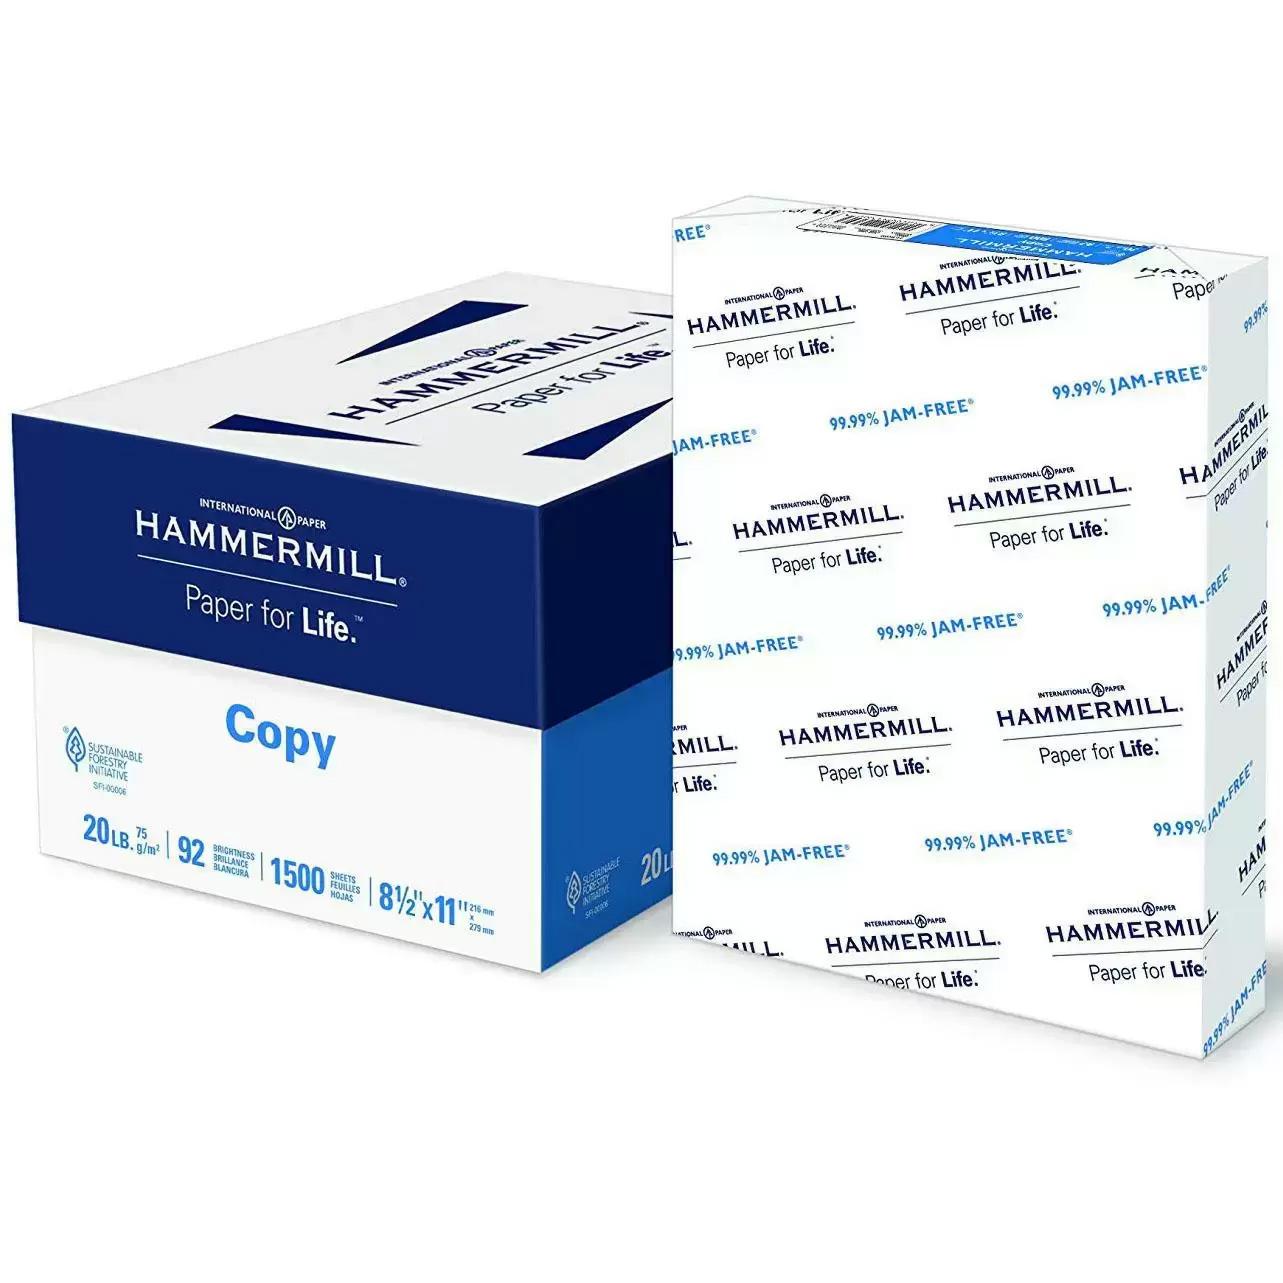 5000 Hammermill Copy Plus Multipurpose Letter Size Papers for $29.99 Shipped